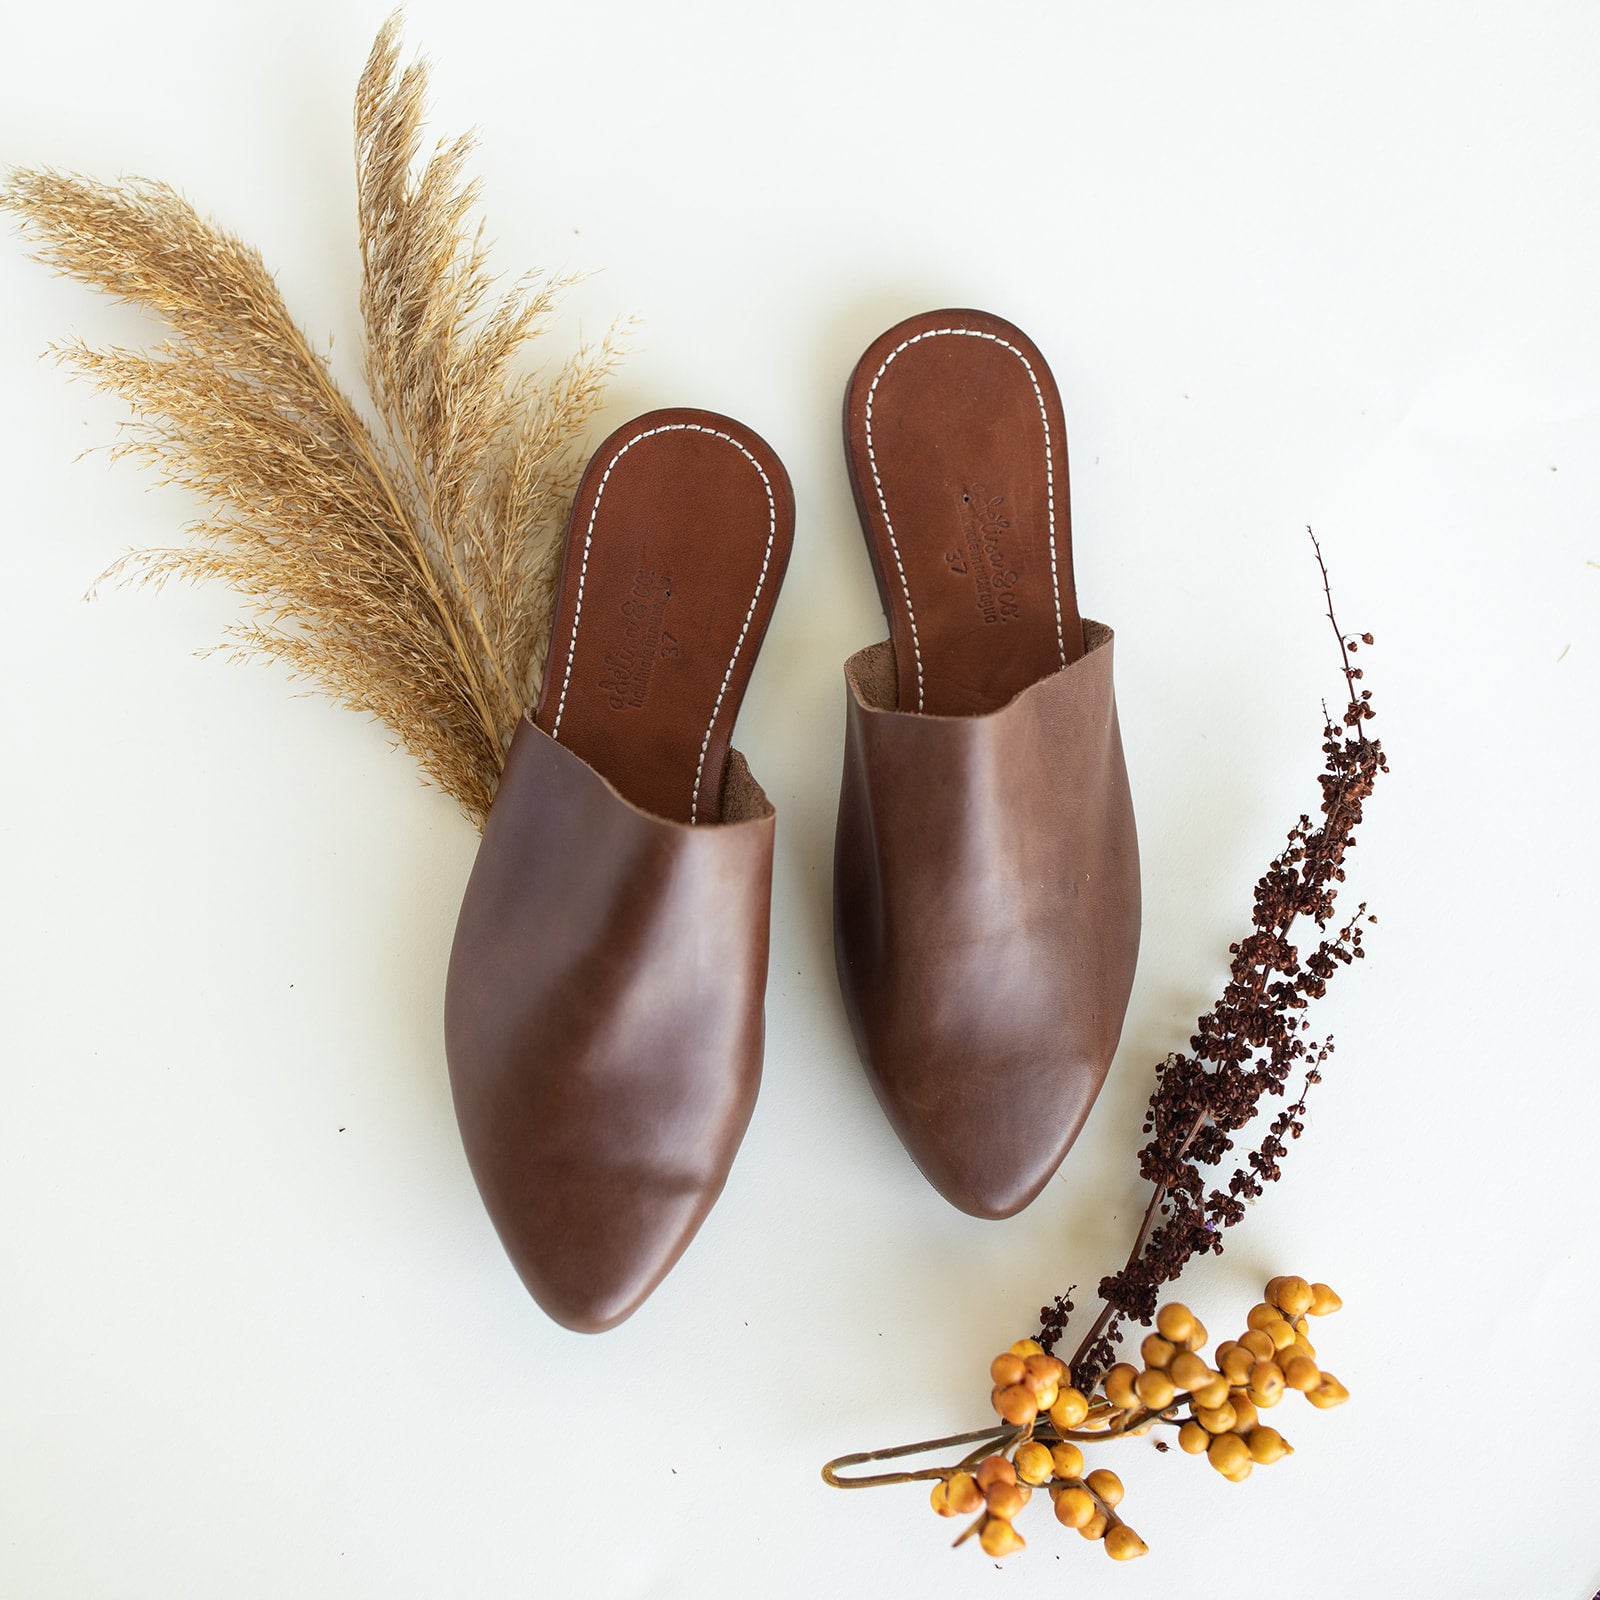 Adelisa &amp; Co leather Mule shoe for women available in black, dark brown and medium brown.